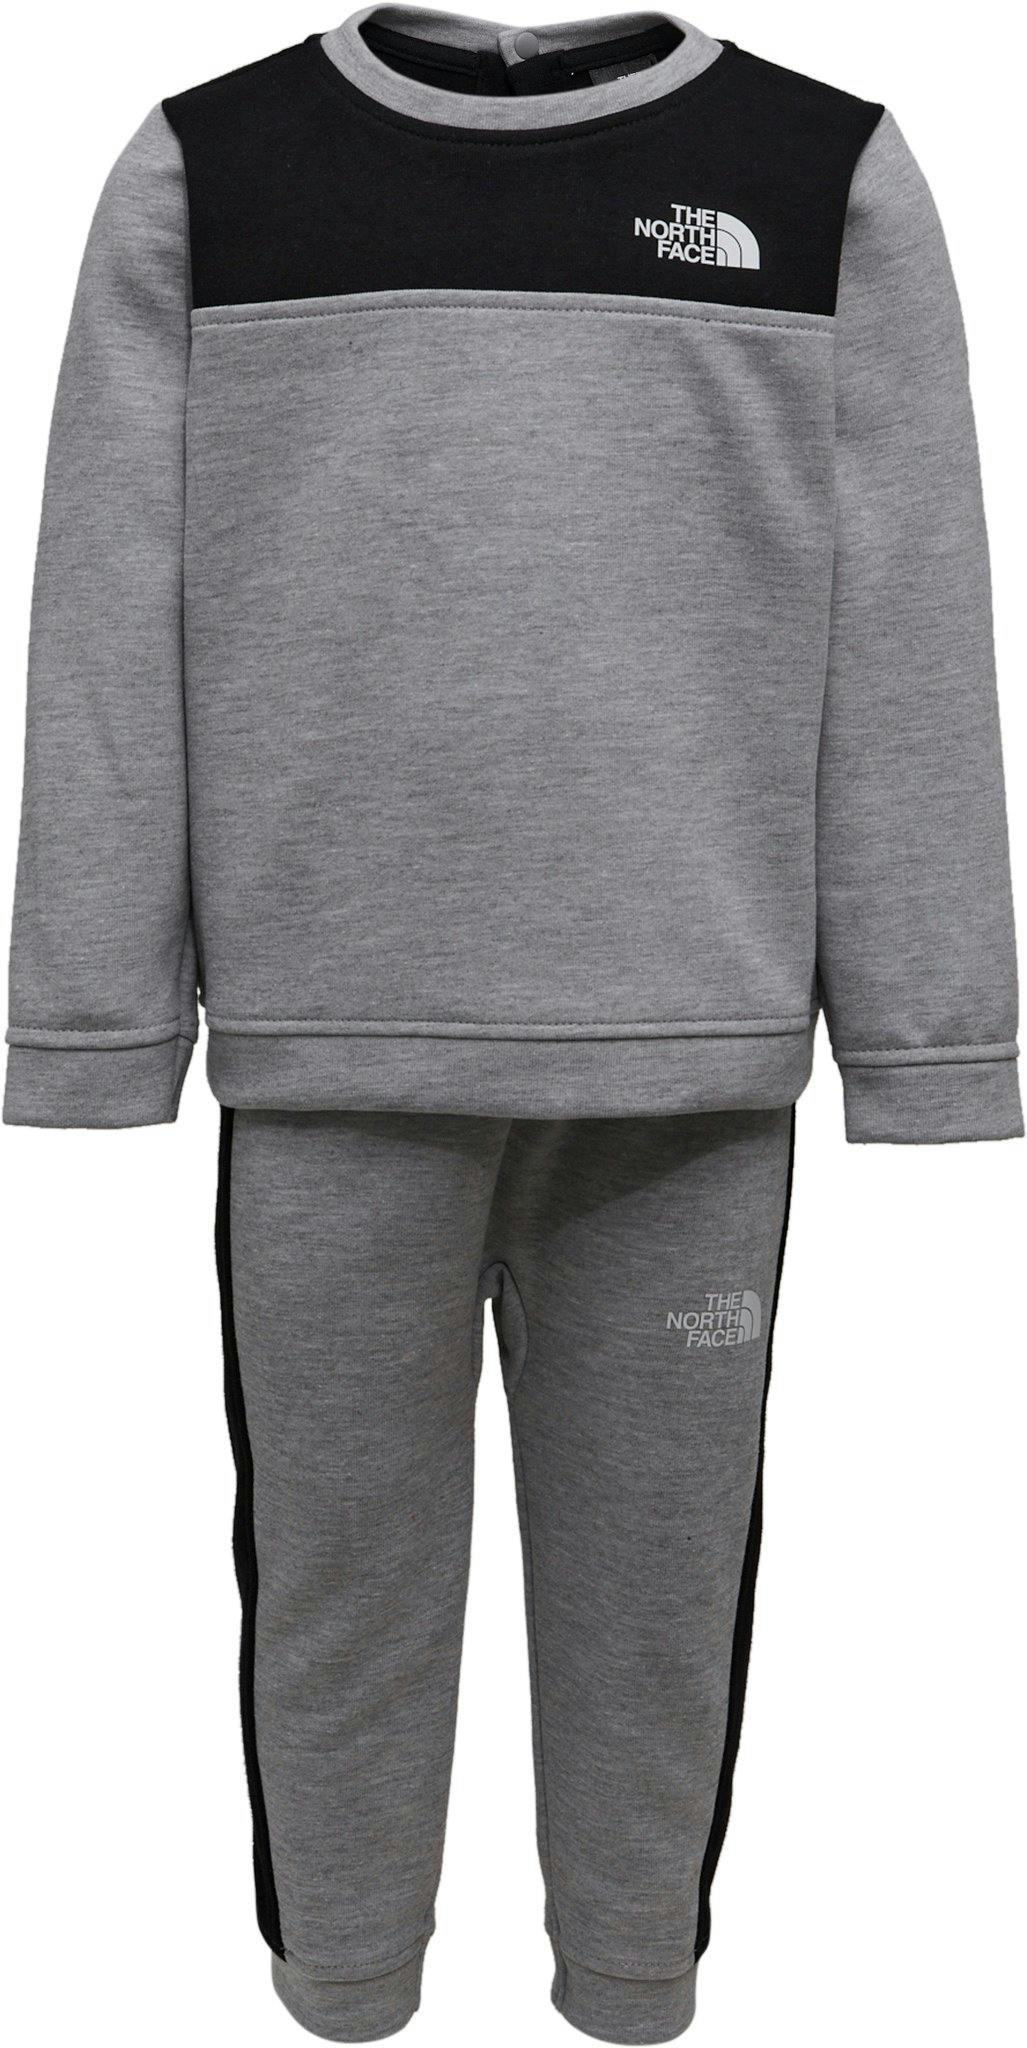 Product image for TNF Tech Crew Neck Top and Bottom Set - Baby